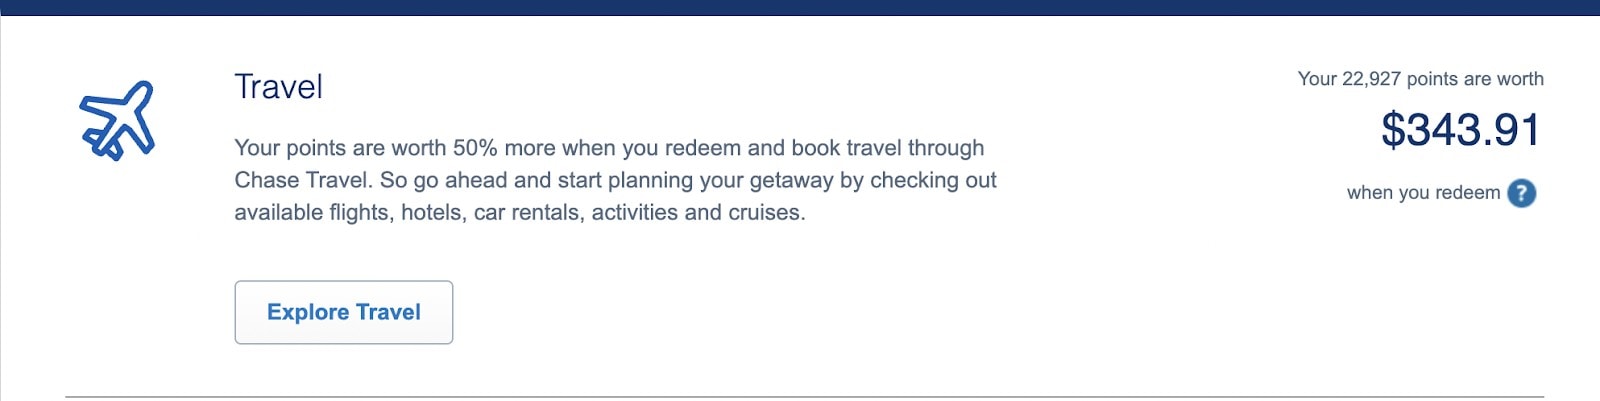 A screenshot from my personal Chase Sapphire Reserve account, showing that the 22,927 CUR points I currently have can be redeemed for $343.91 in travel.